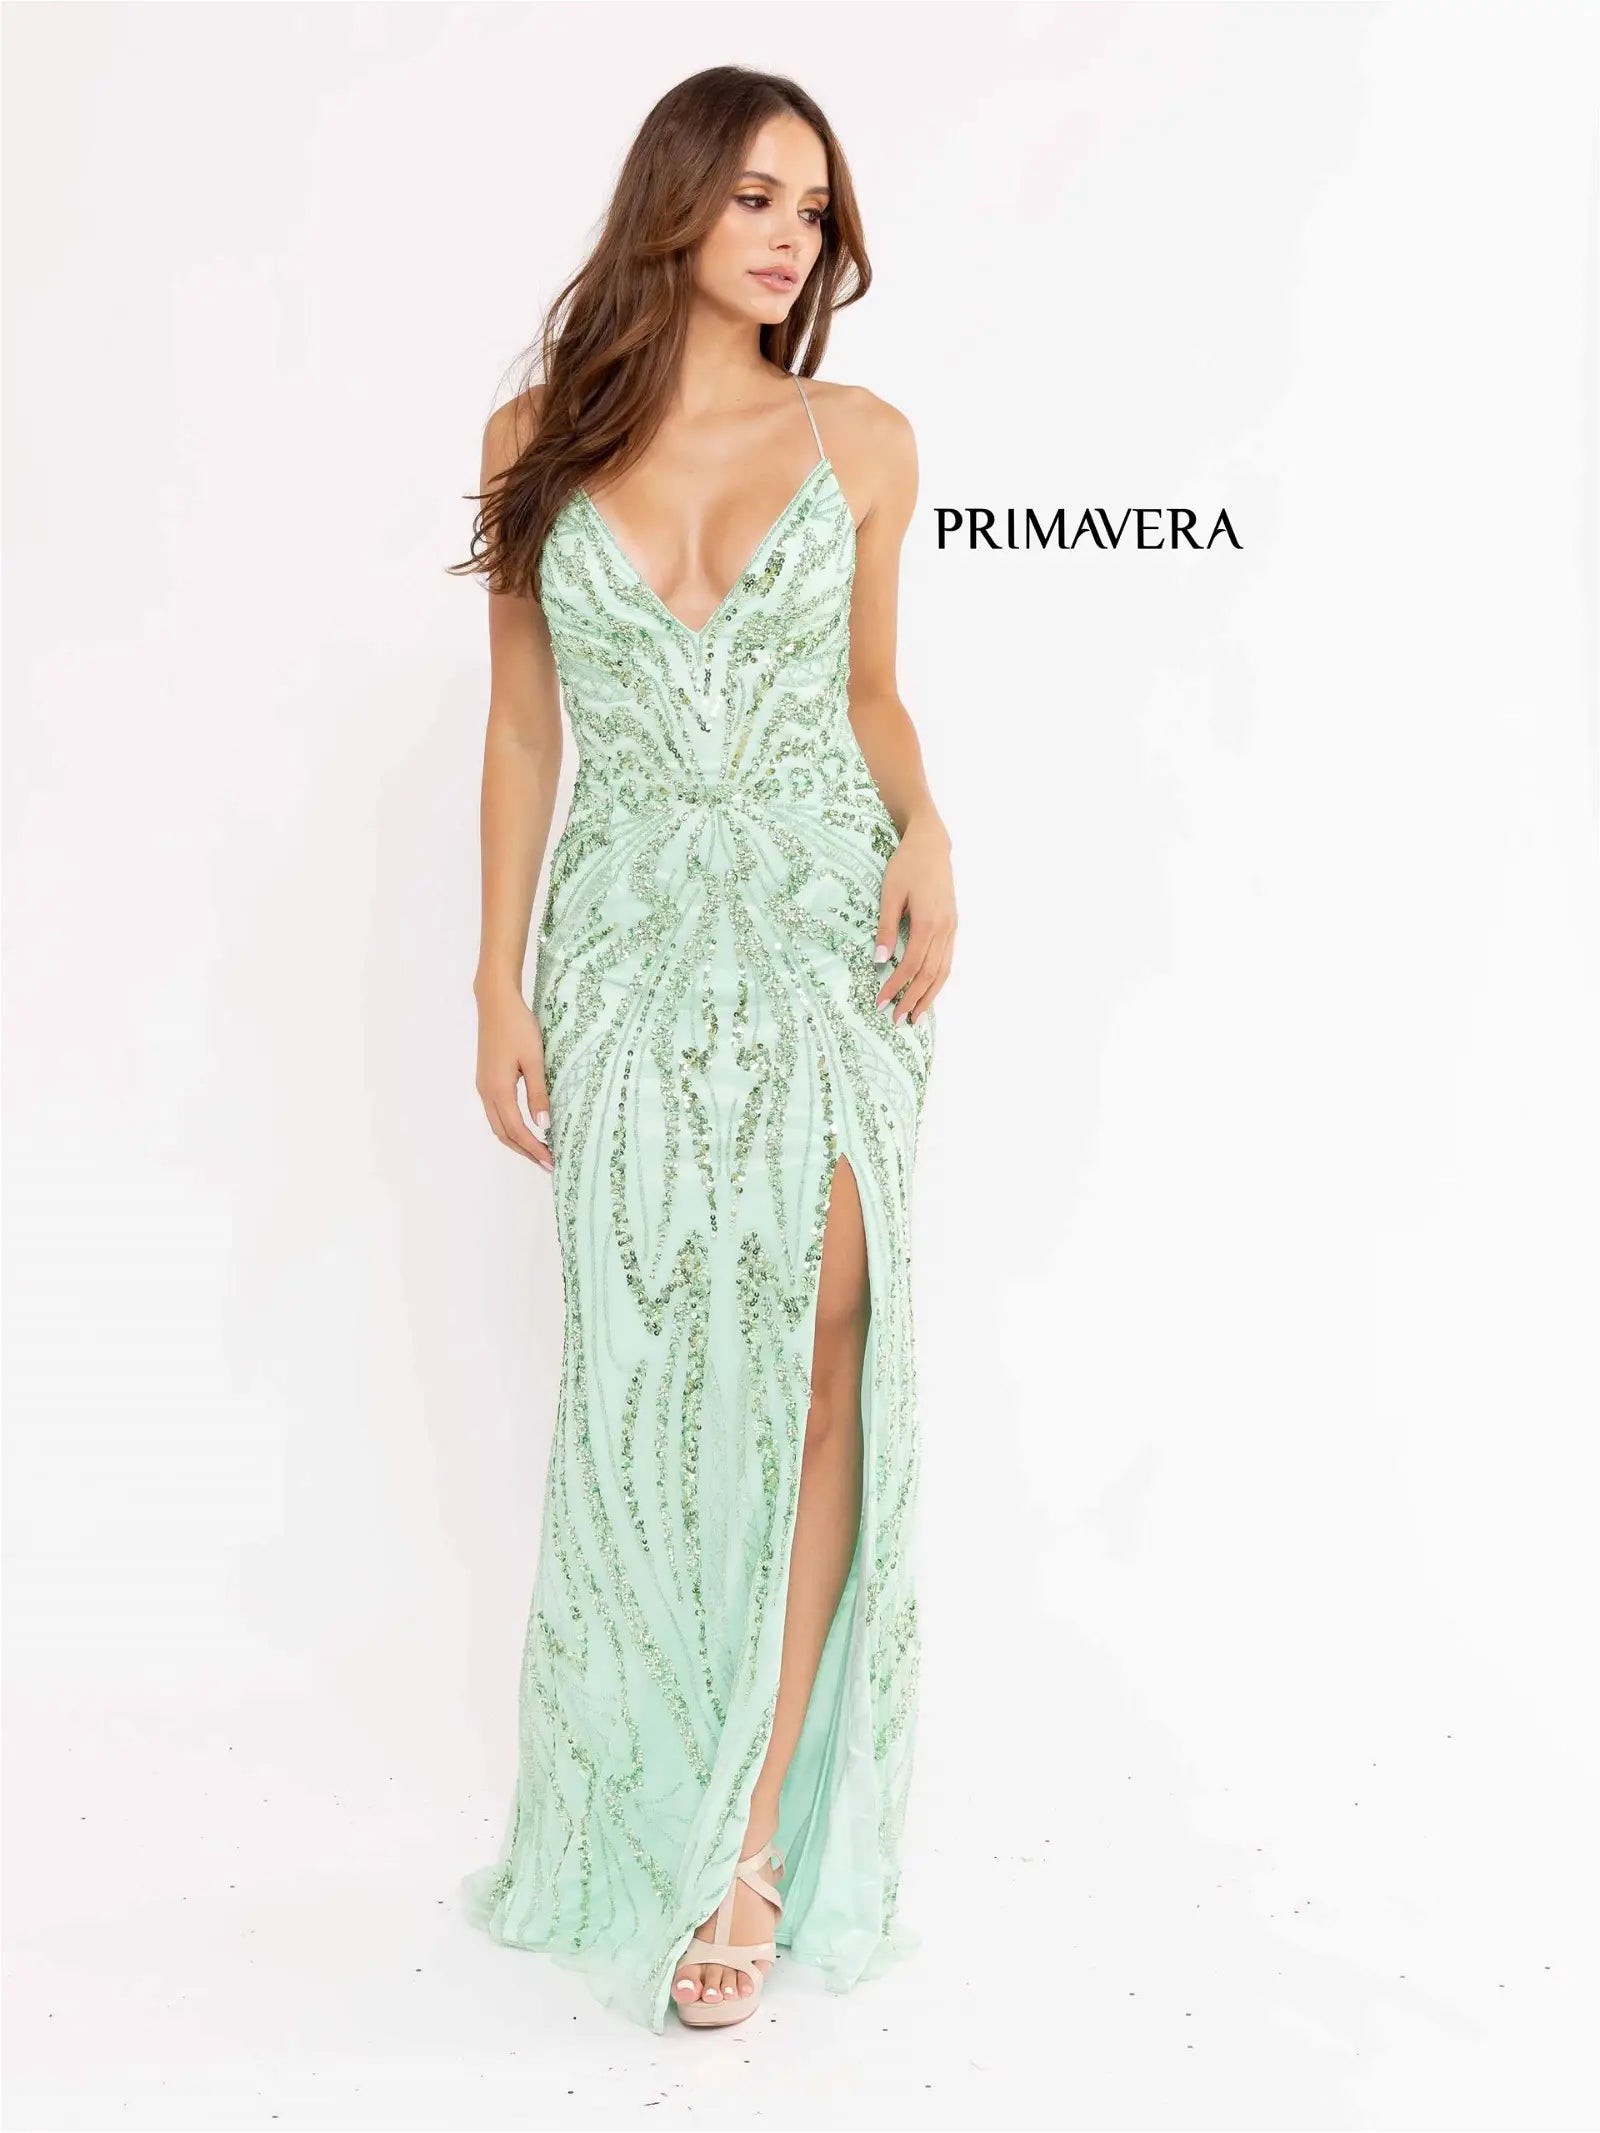 Primavera Couture 3958 Prom Dress Long beaded Gown. Its has a slit and a beautiful design on the gown.